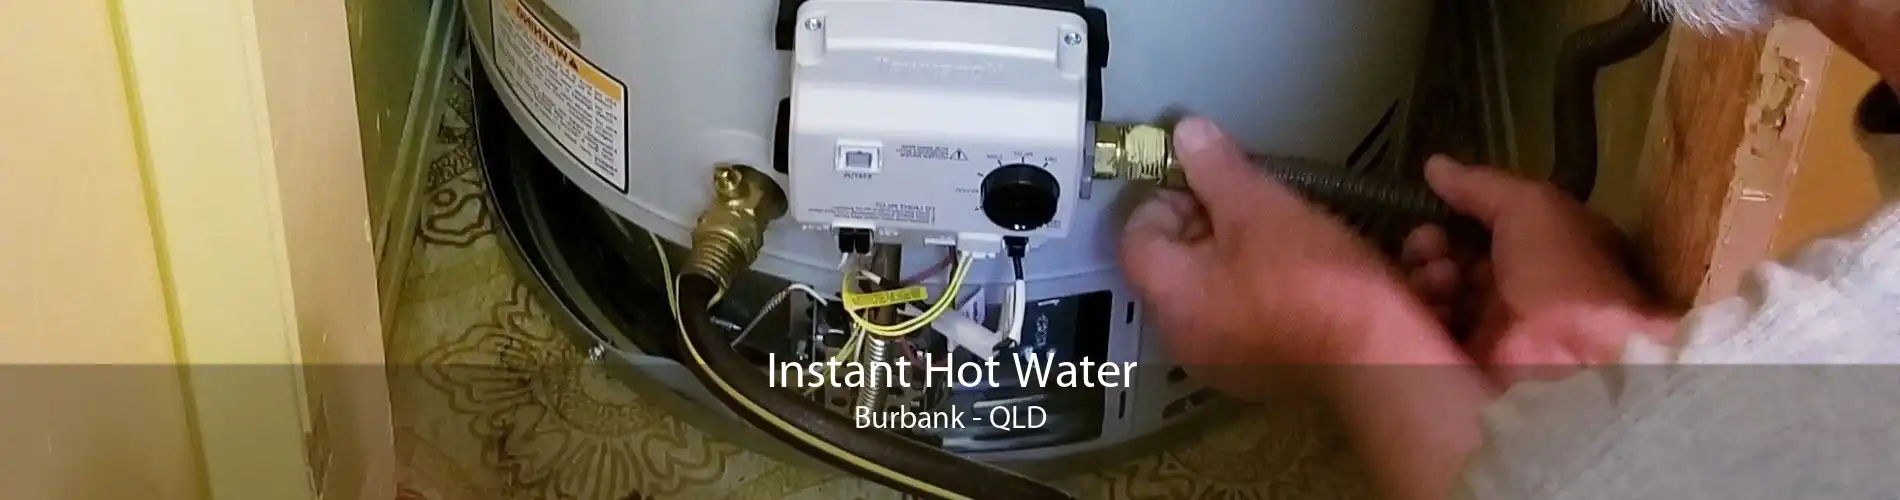 Instant Hot Water Burbank - QLD